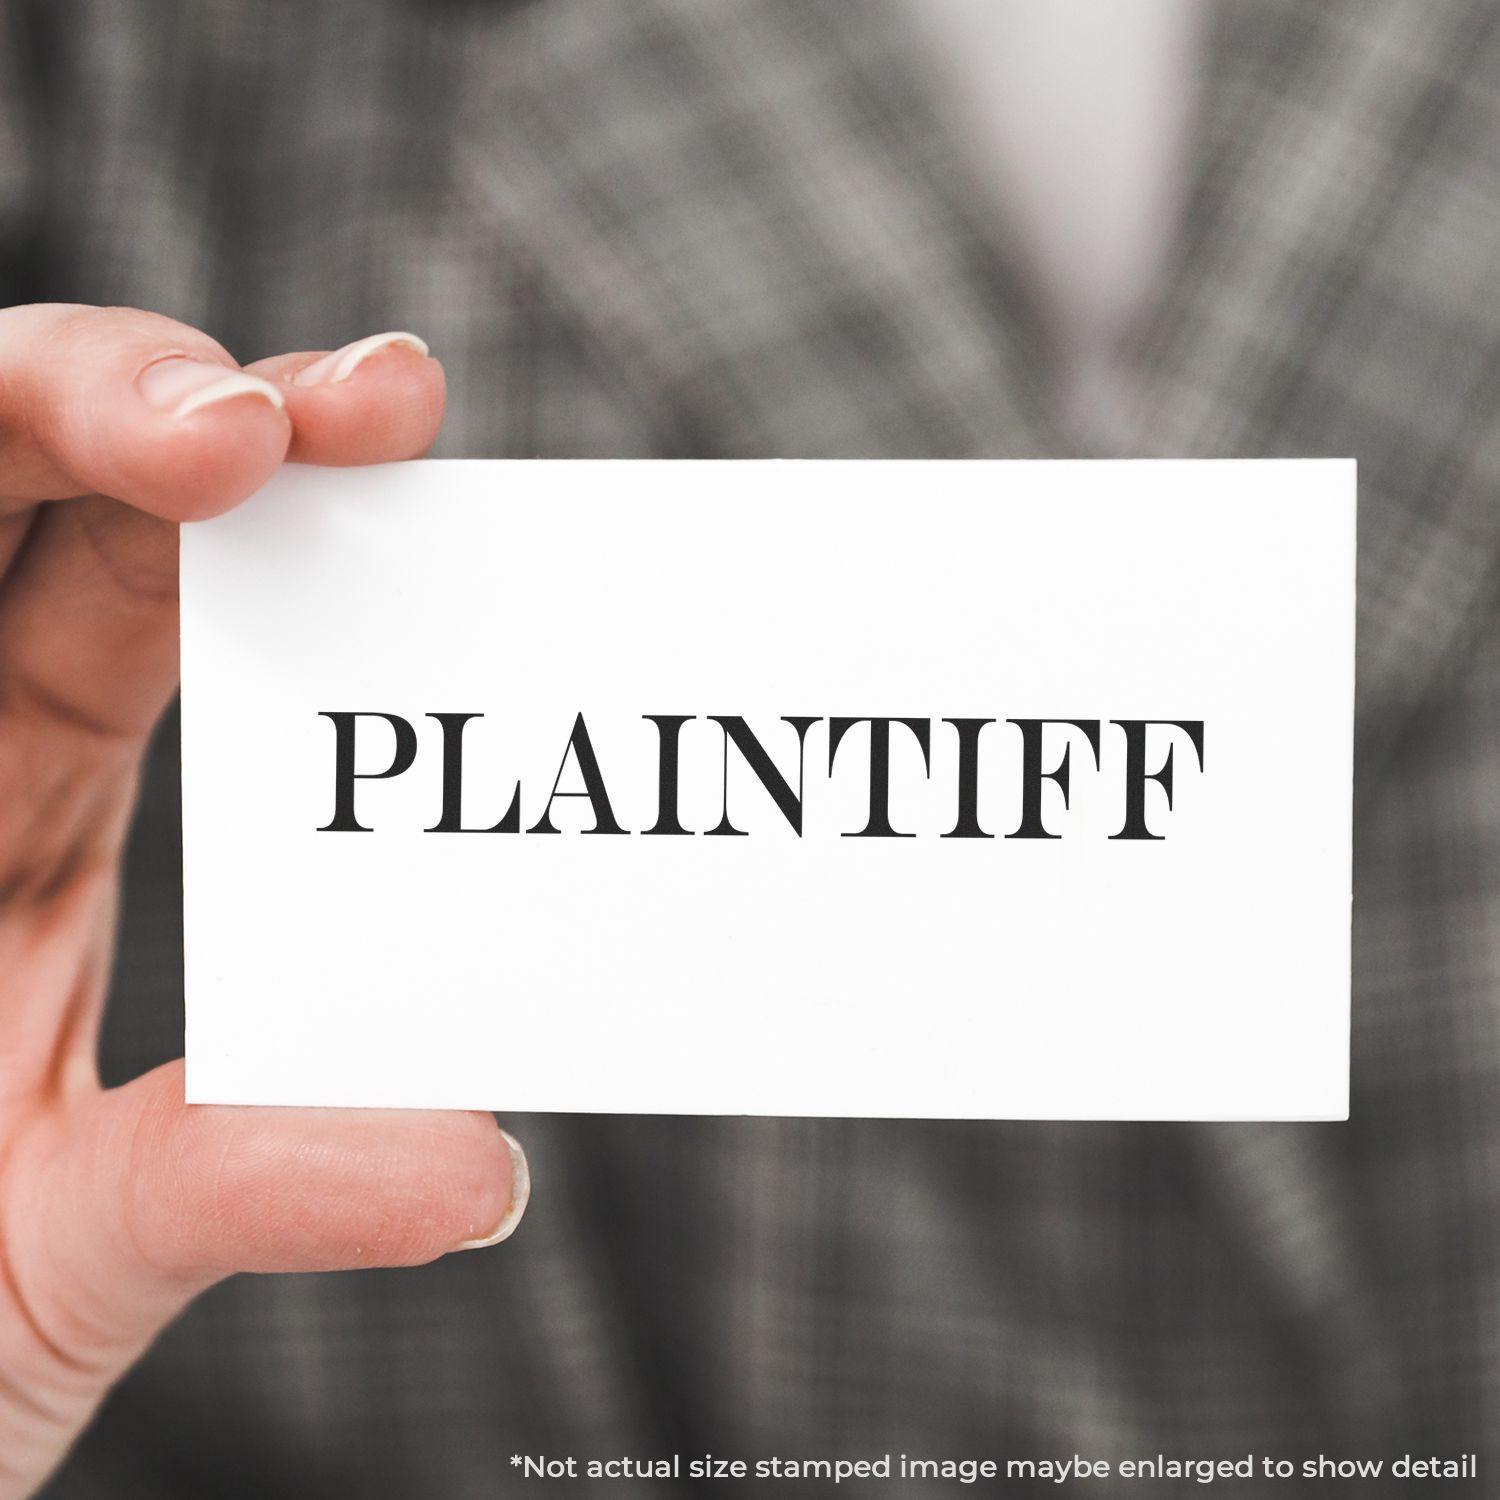 A stock office rubber stamp with a stamped image showing how the text "PLAINTIFF" is displayed after stamping.